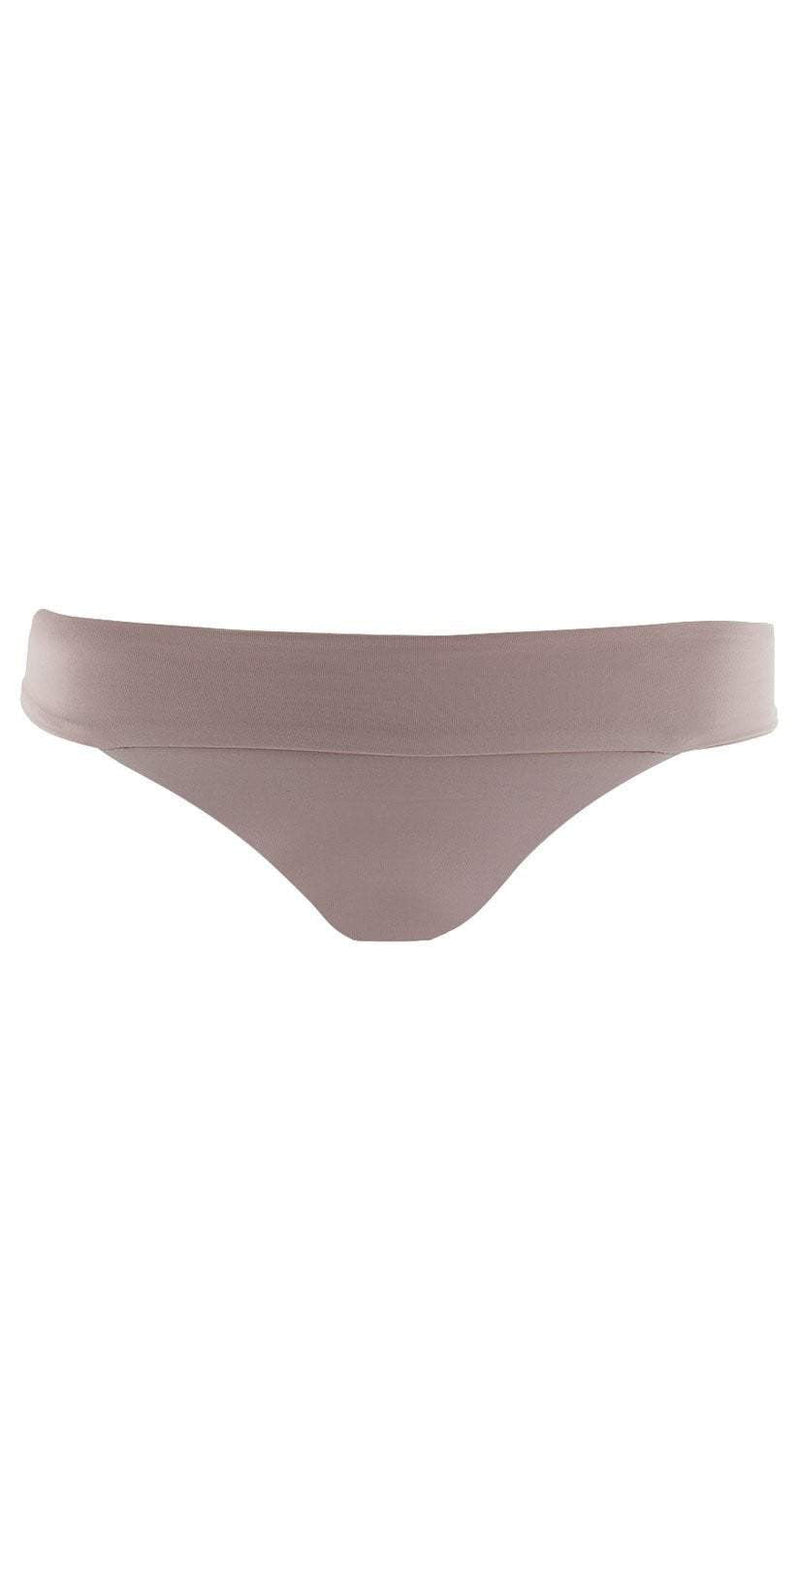 L Space Veronica Bottom in Dusty Pearl LSVEC17-DSP: